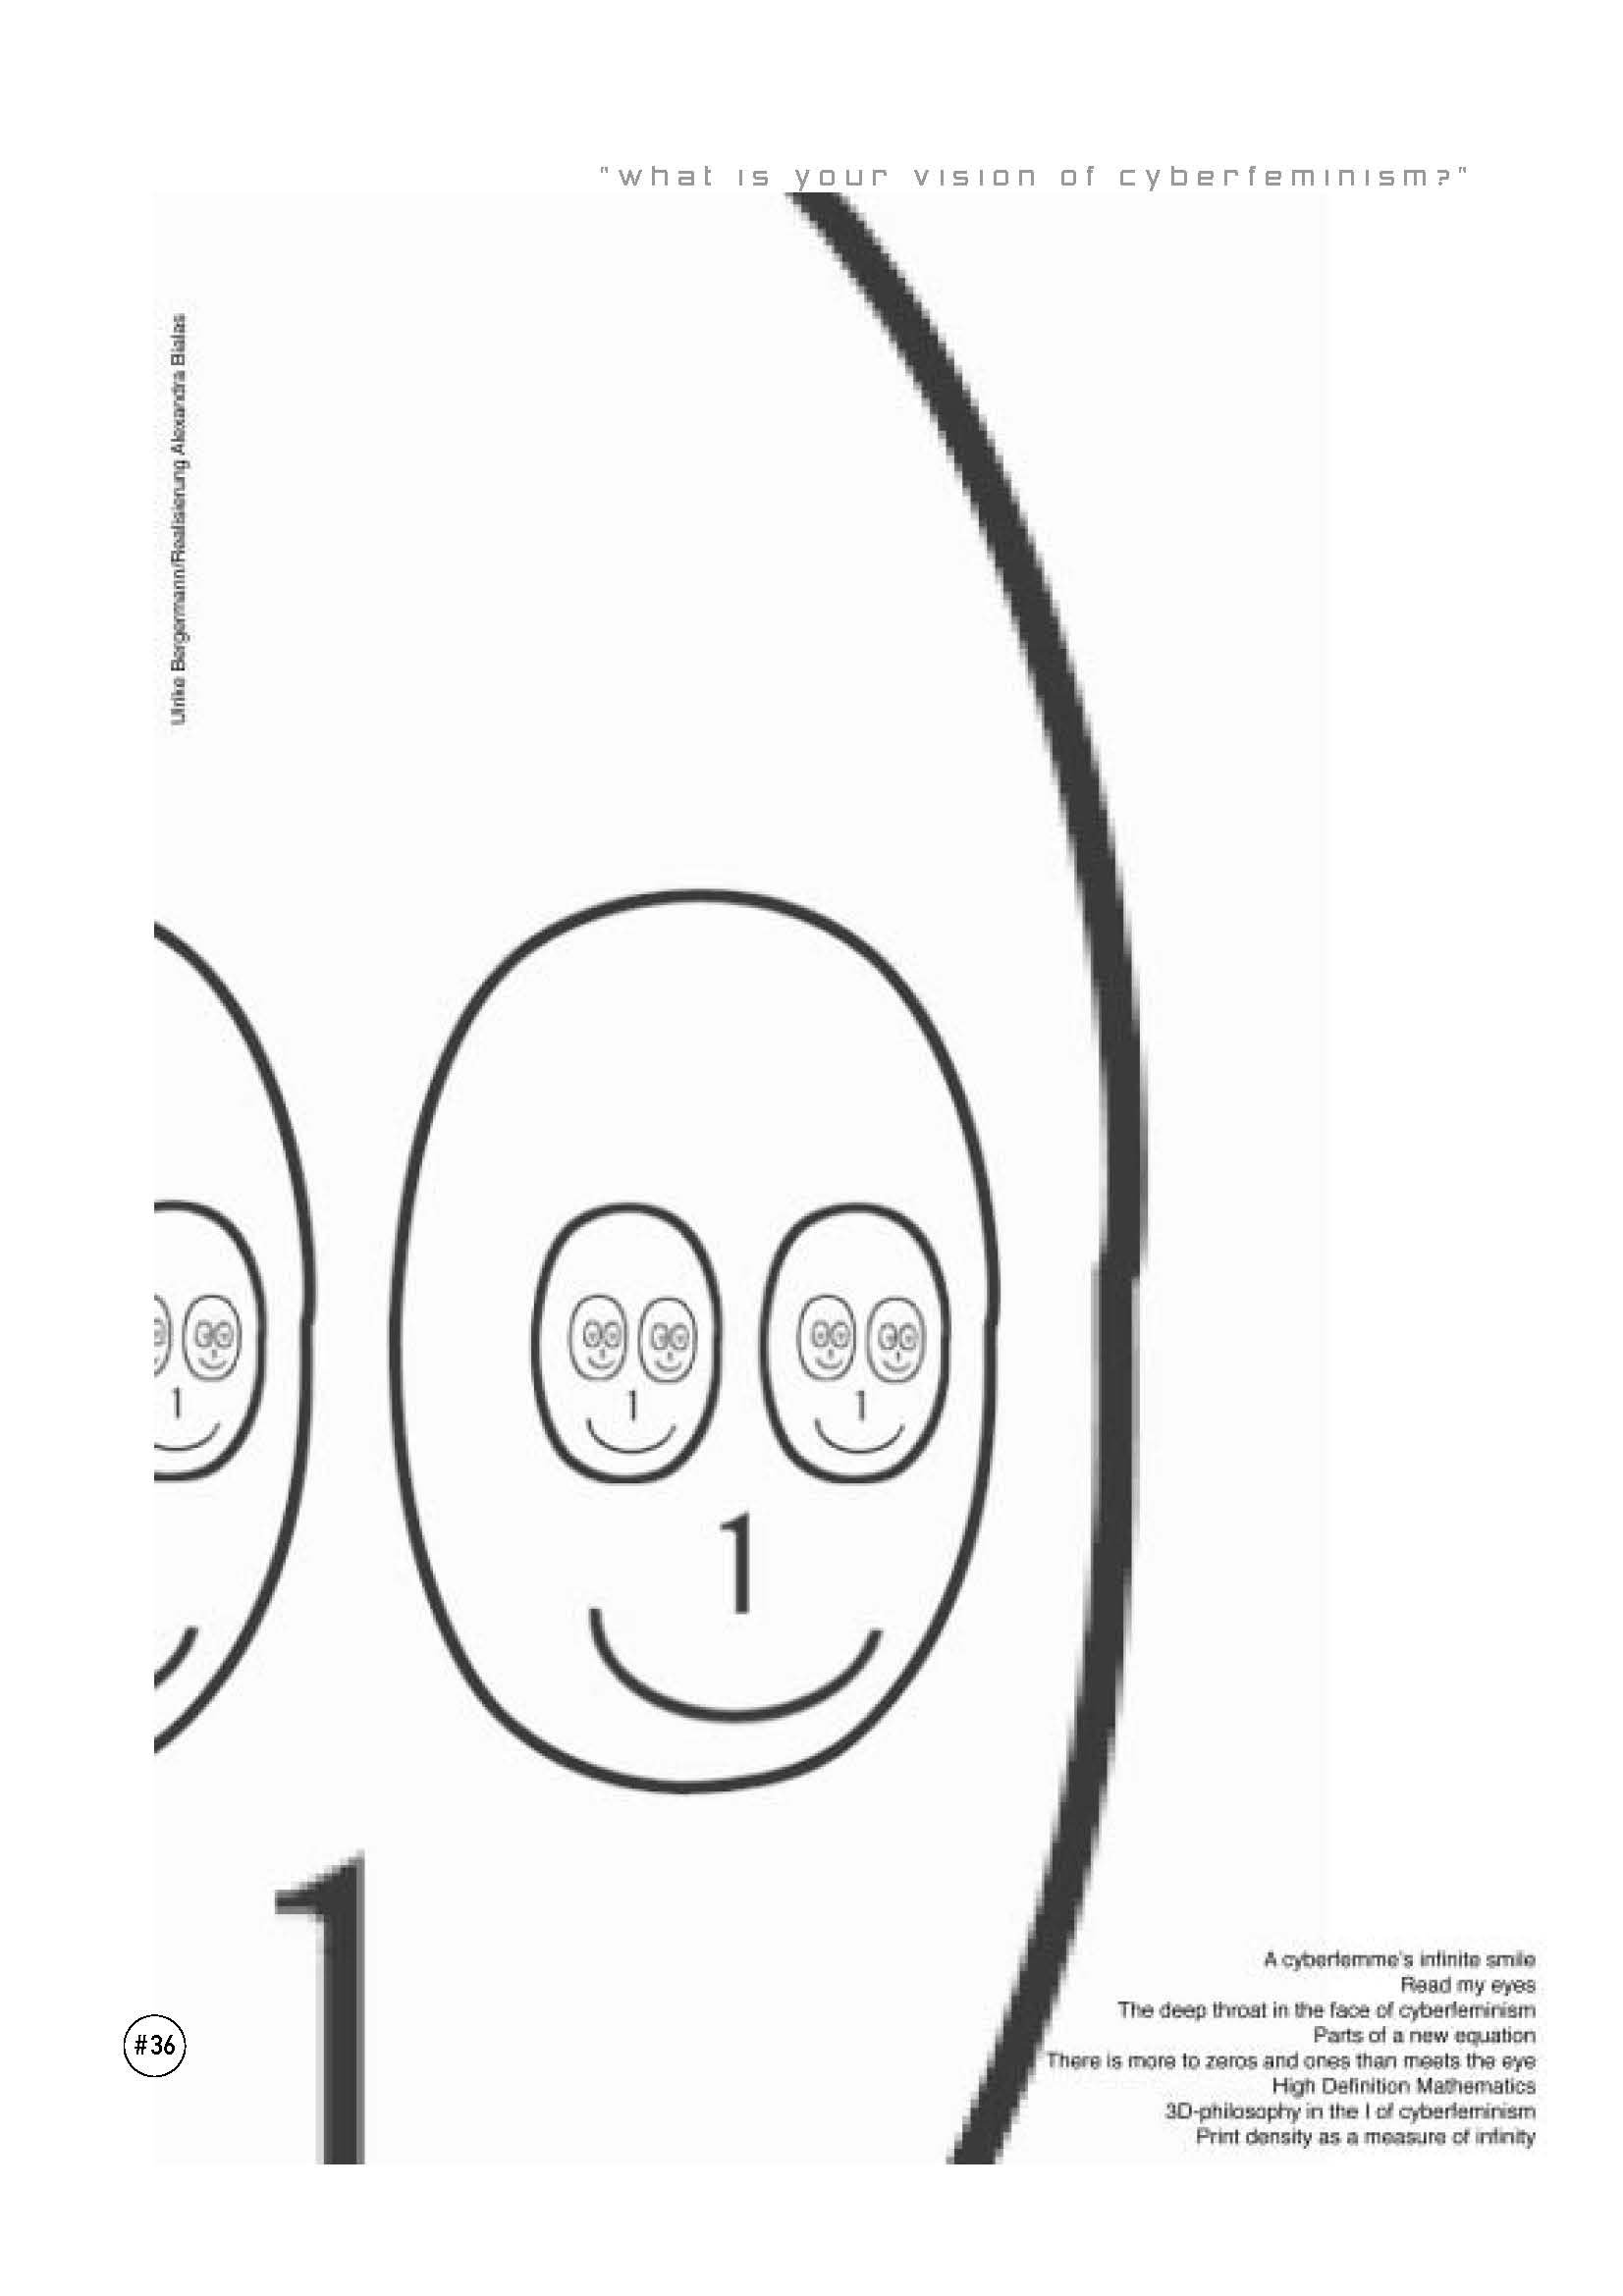 Graphic cartoon of zoomed up smily face with a "1" for its nose and "0" for its eyes, infinitely displaying its face wherever there is an eye.